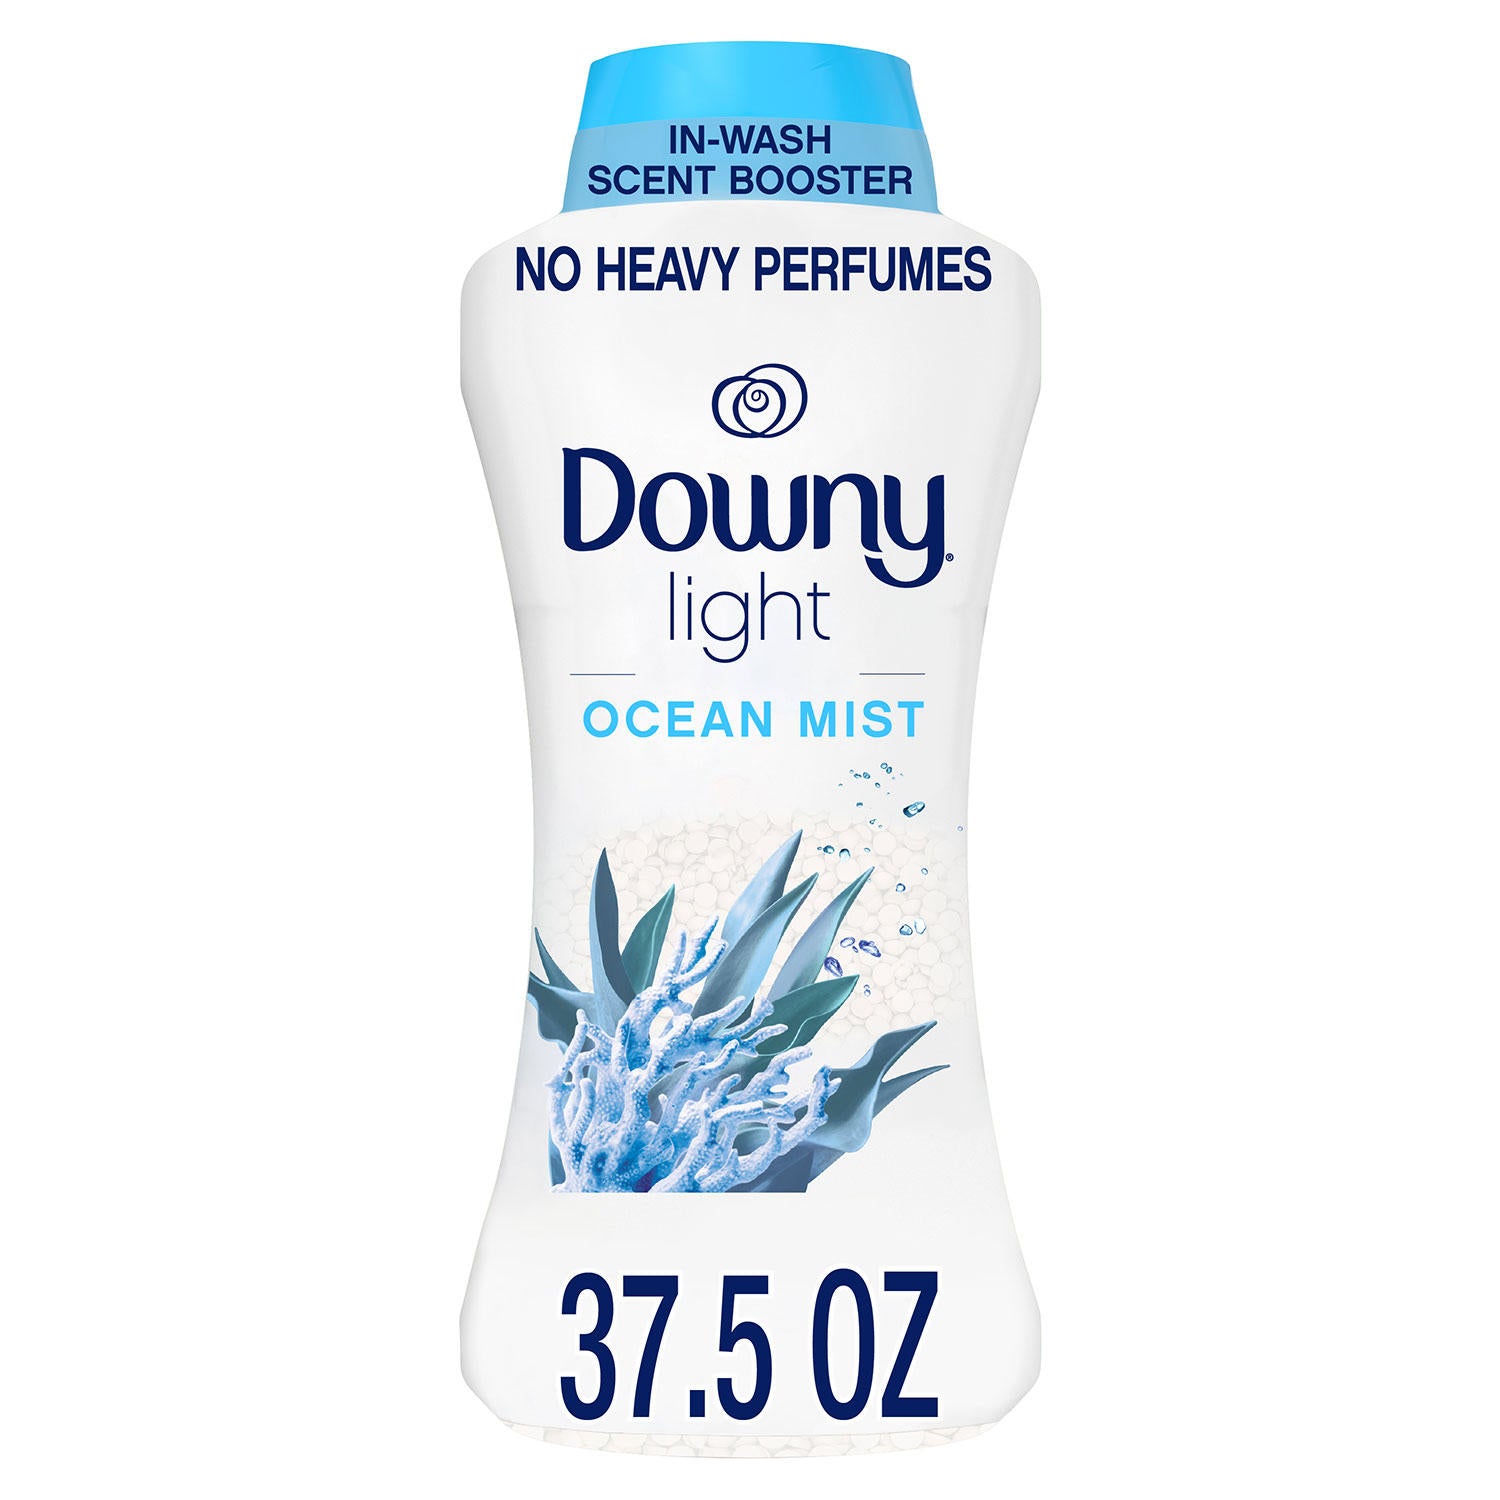 Downy Light Laundry Scent Booster Beads For Washer With No Heavy